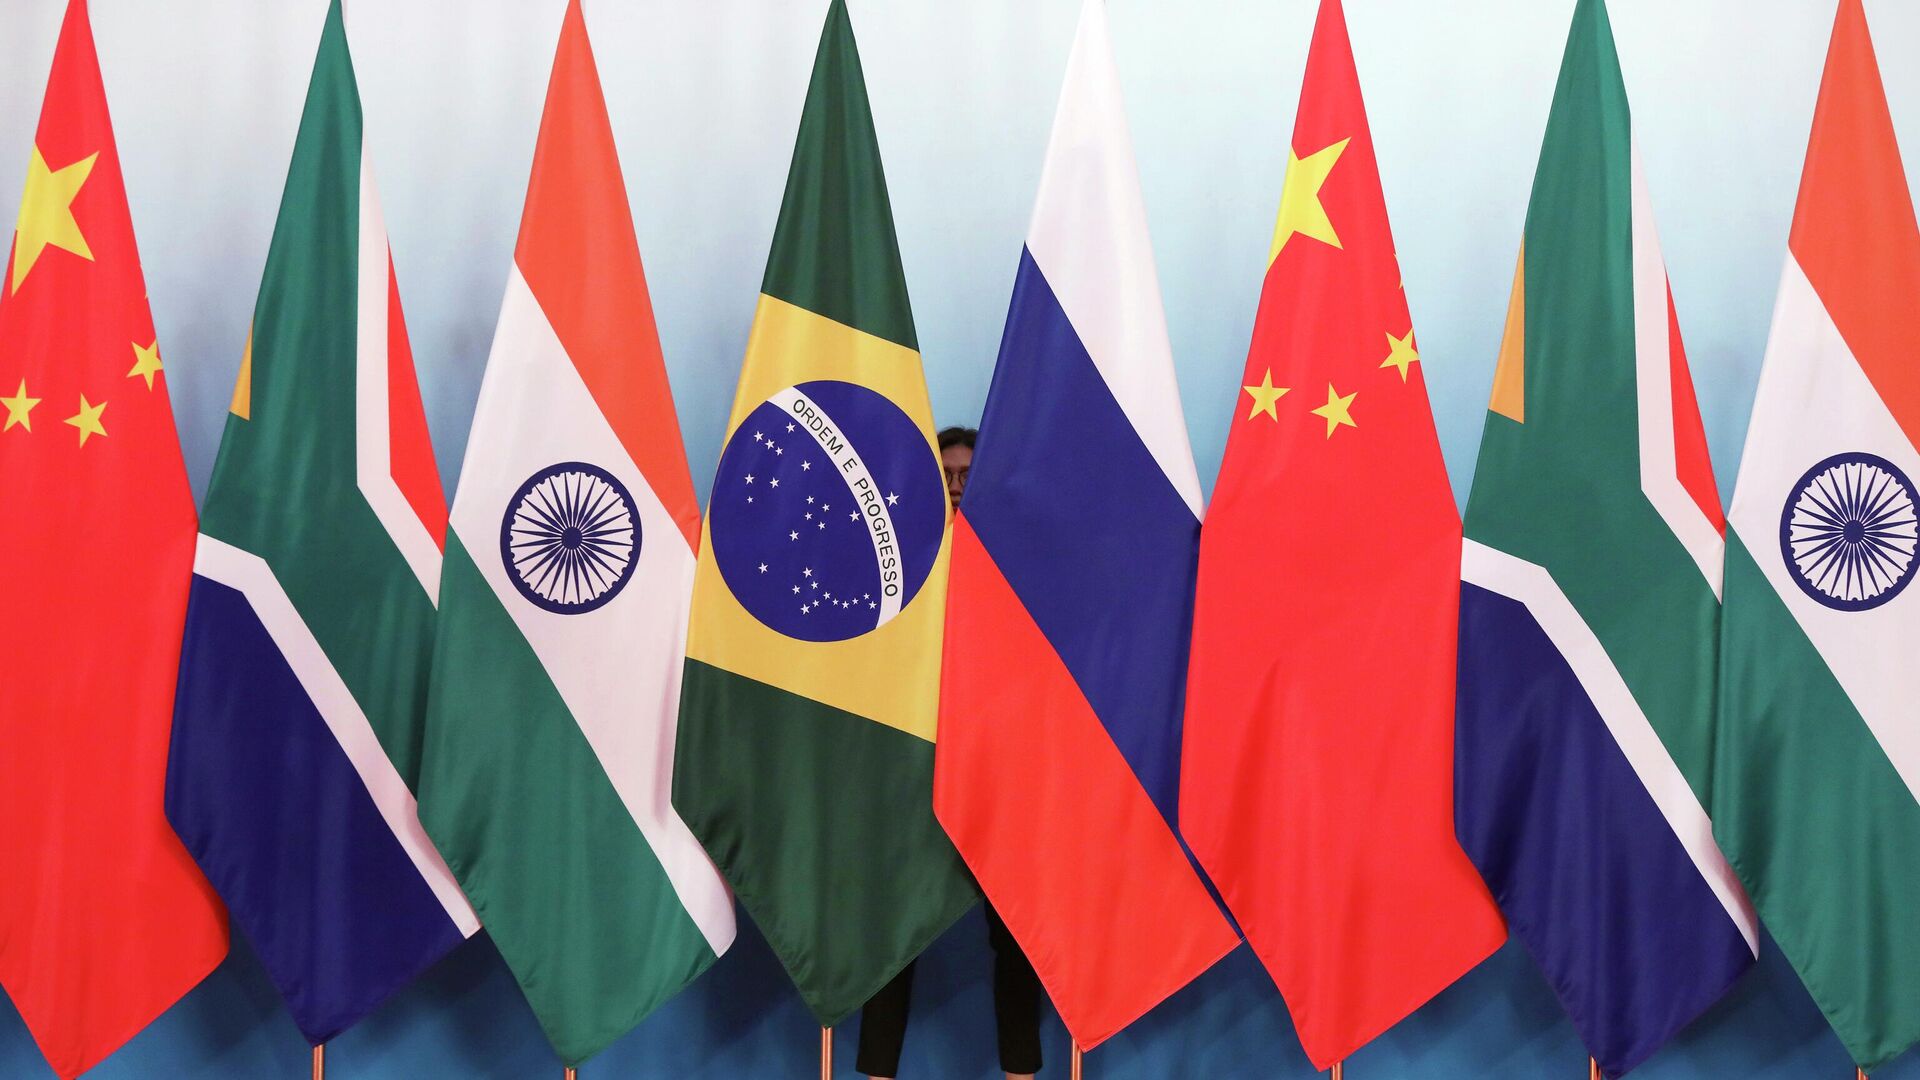 Staff worker stands behind national flags of Brazil, Russia, China, South Africa and India to tidy the flags ahead of a group photo during the BRICS Summit at the Xiamen International Conference and Exhibition Center in Xiamen, southeastern China's Fujian Province, Monday, Sept. 4, 2017. - Sputnik International, 1920, 03.06.2023